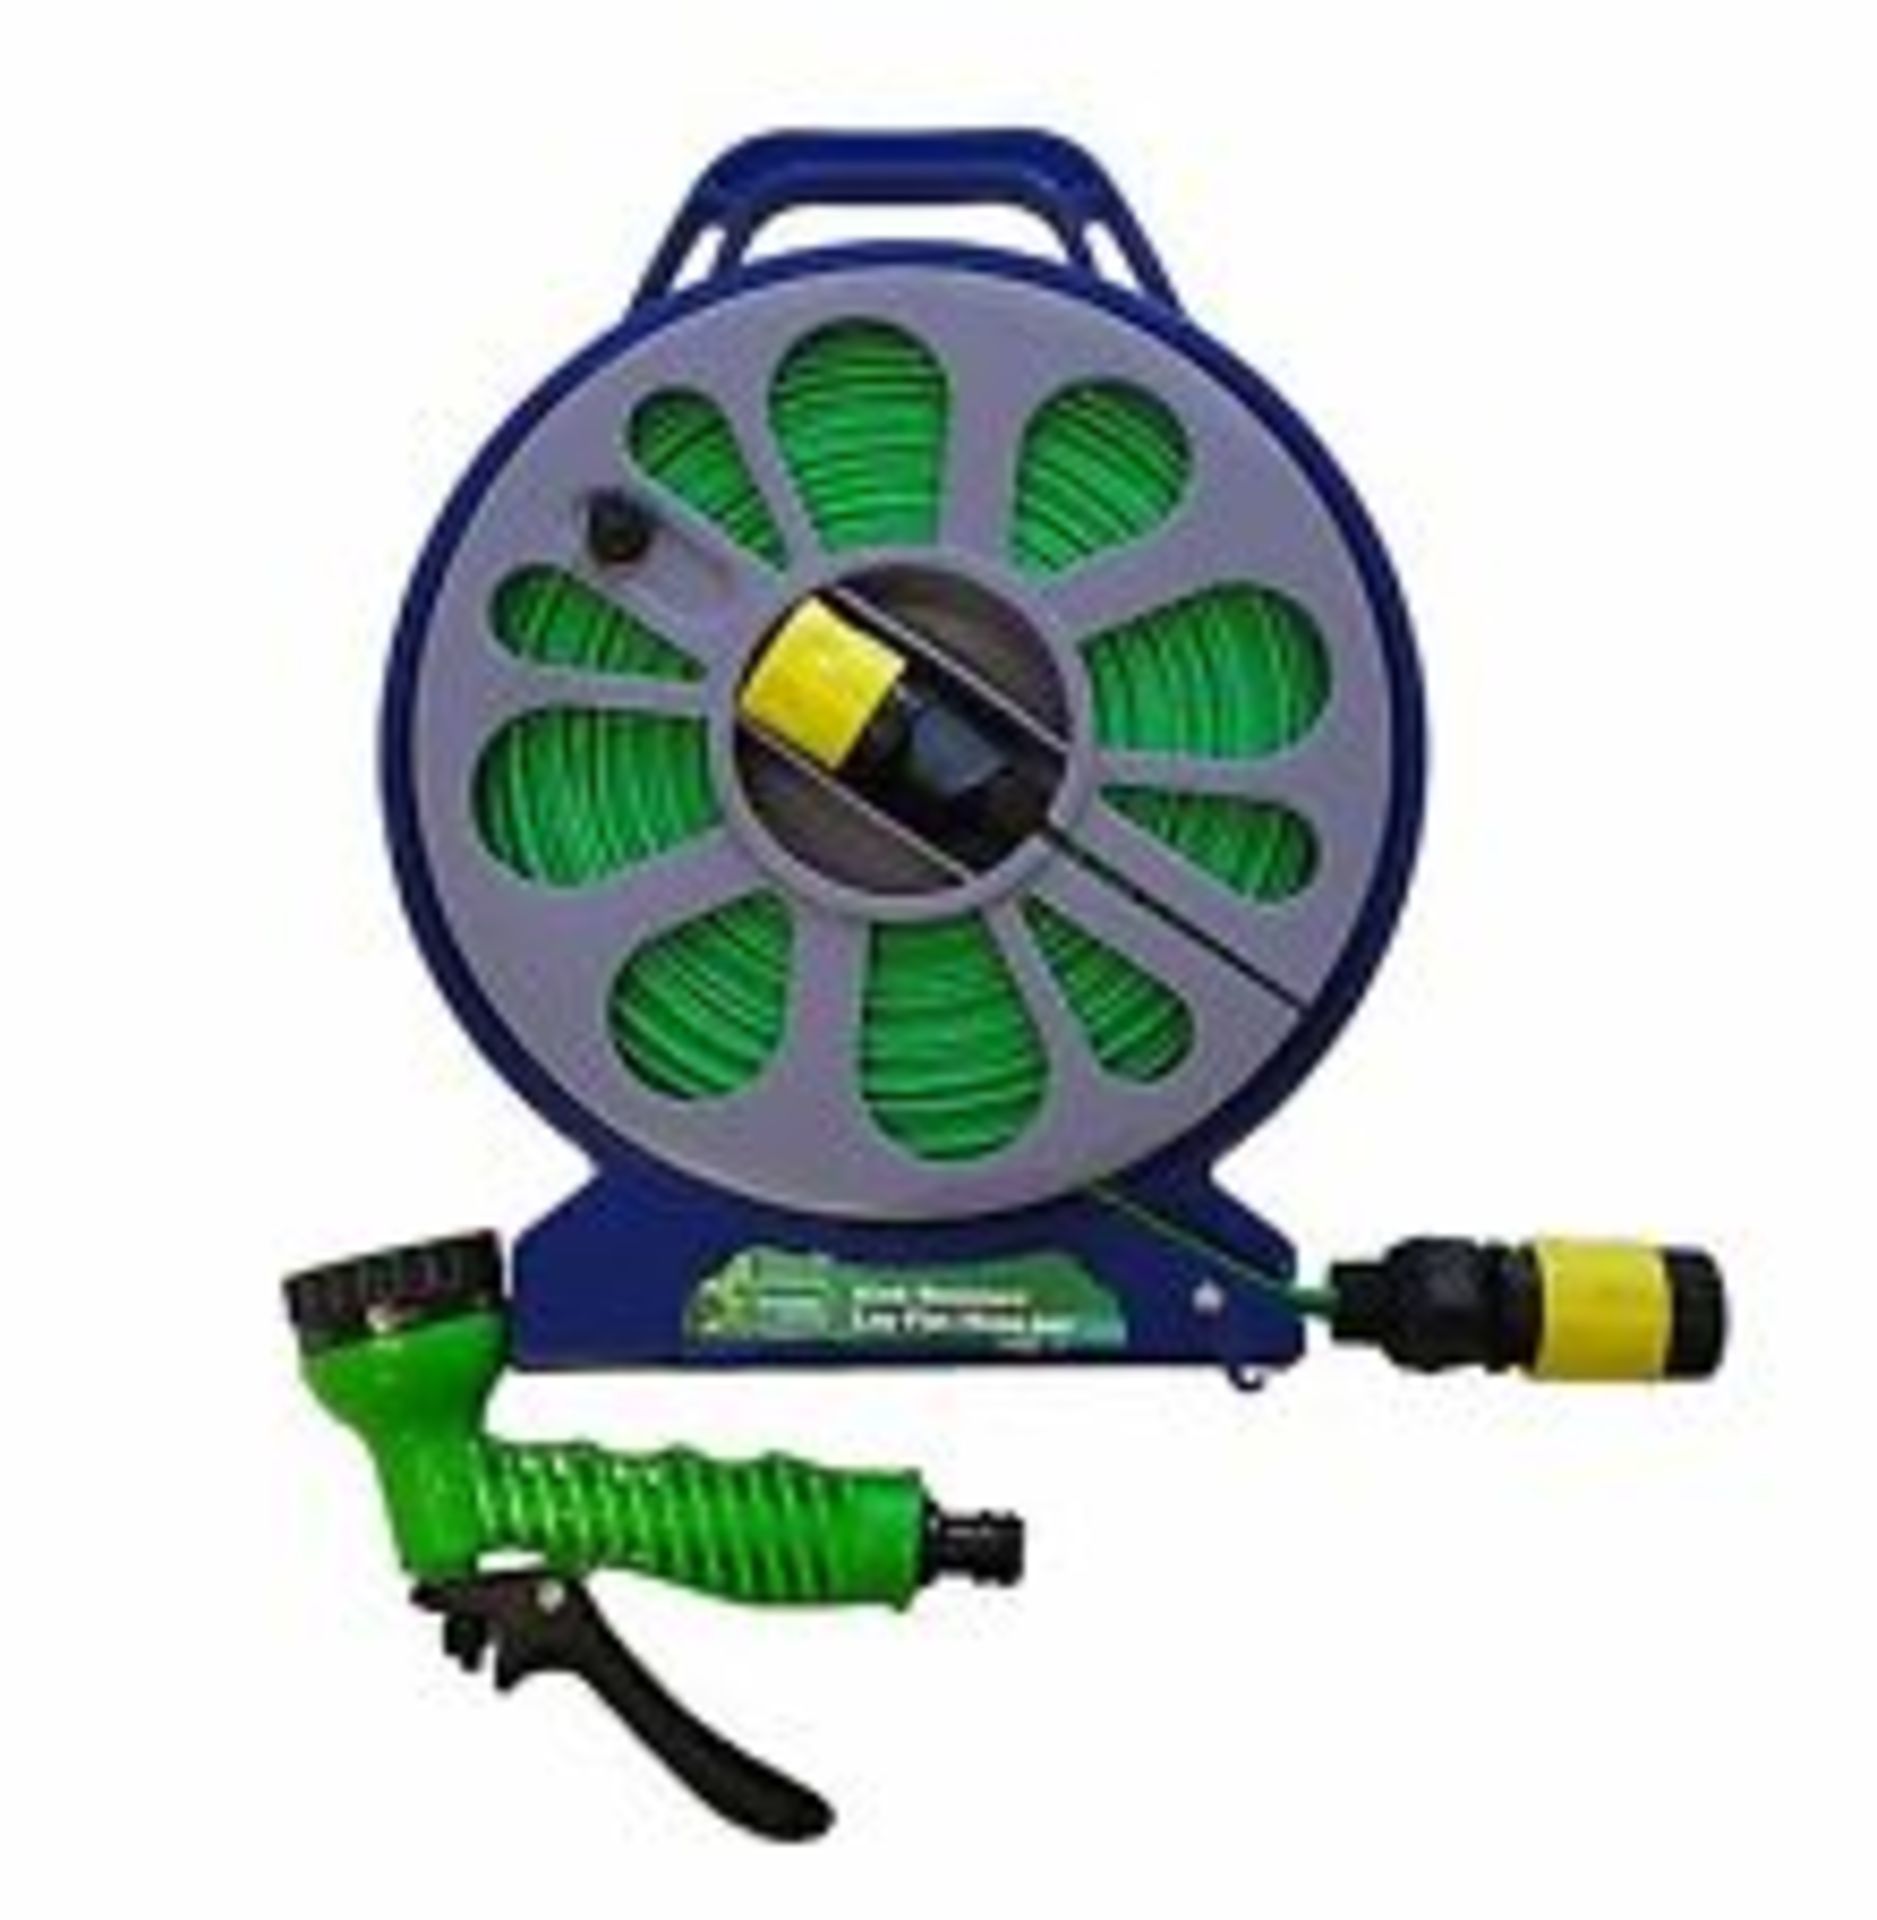 V Brand New Kink Resistant Lay Flat Hose Set 15 metres (approx) With Multi-Setting Spray Gun -